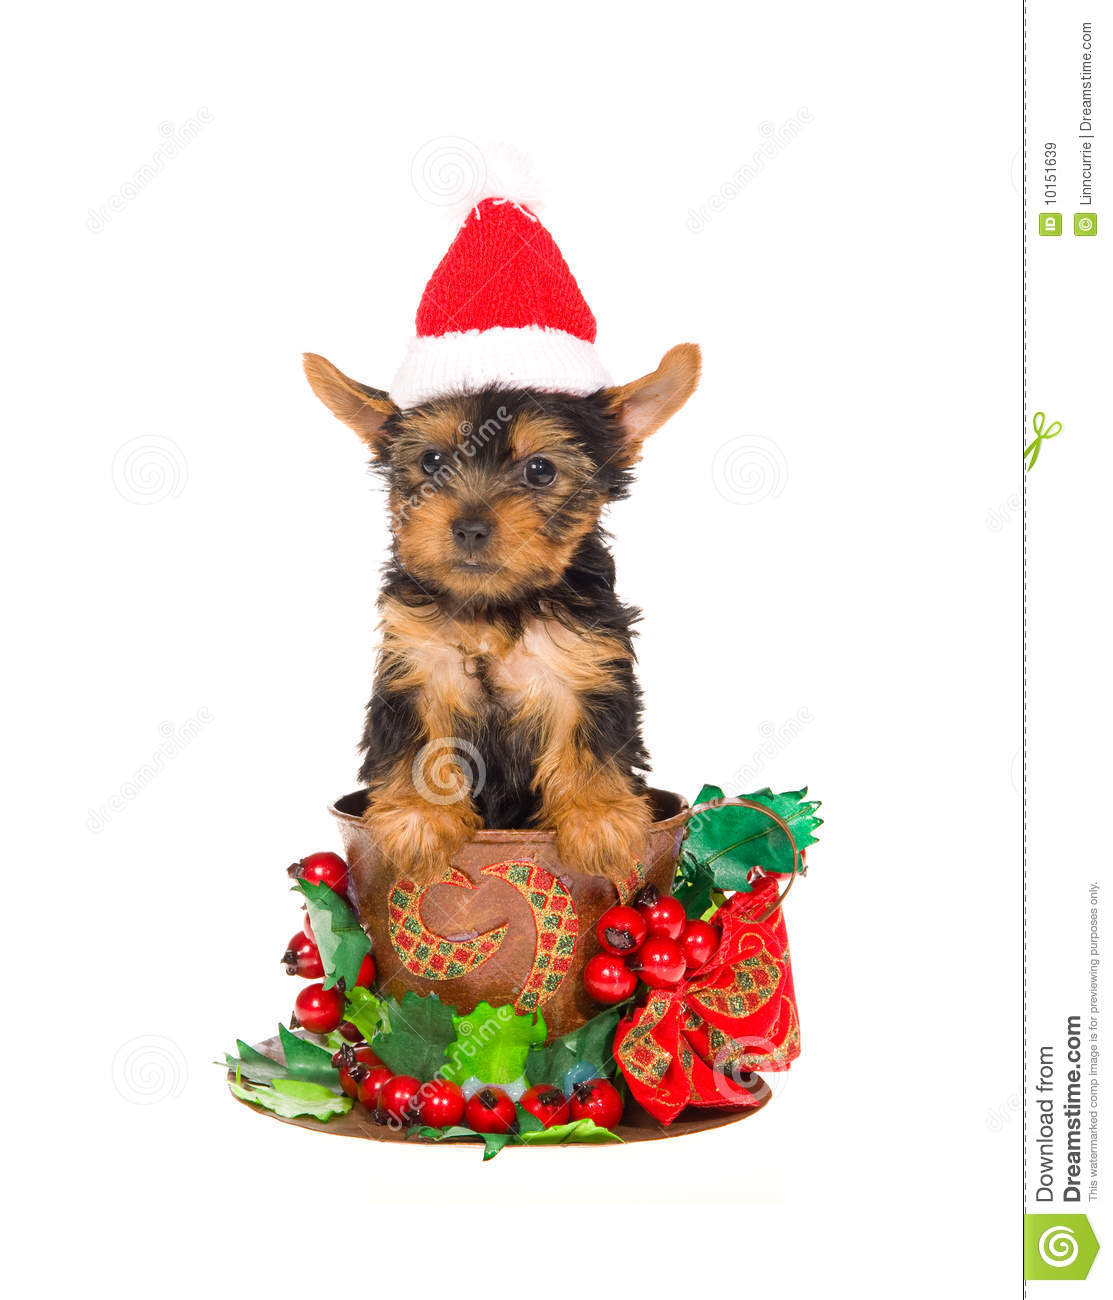 Yorkie Puppy Sitting Inside Large Cup With Christmas Berries And Bow